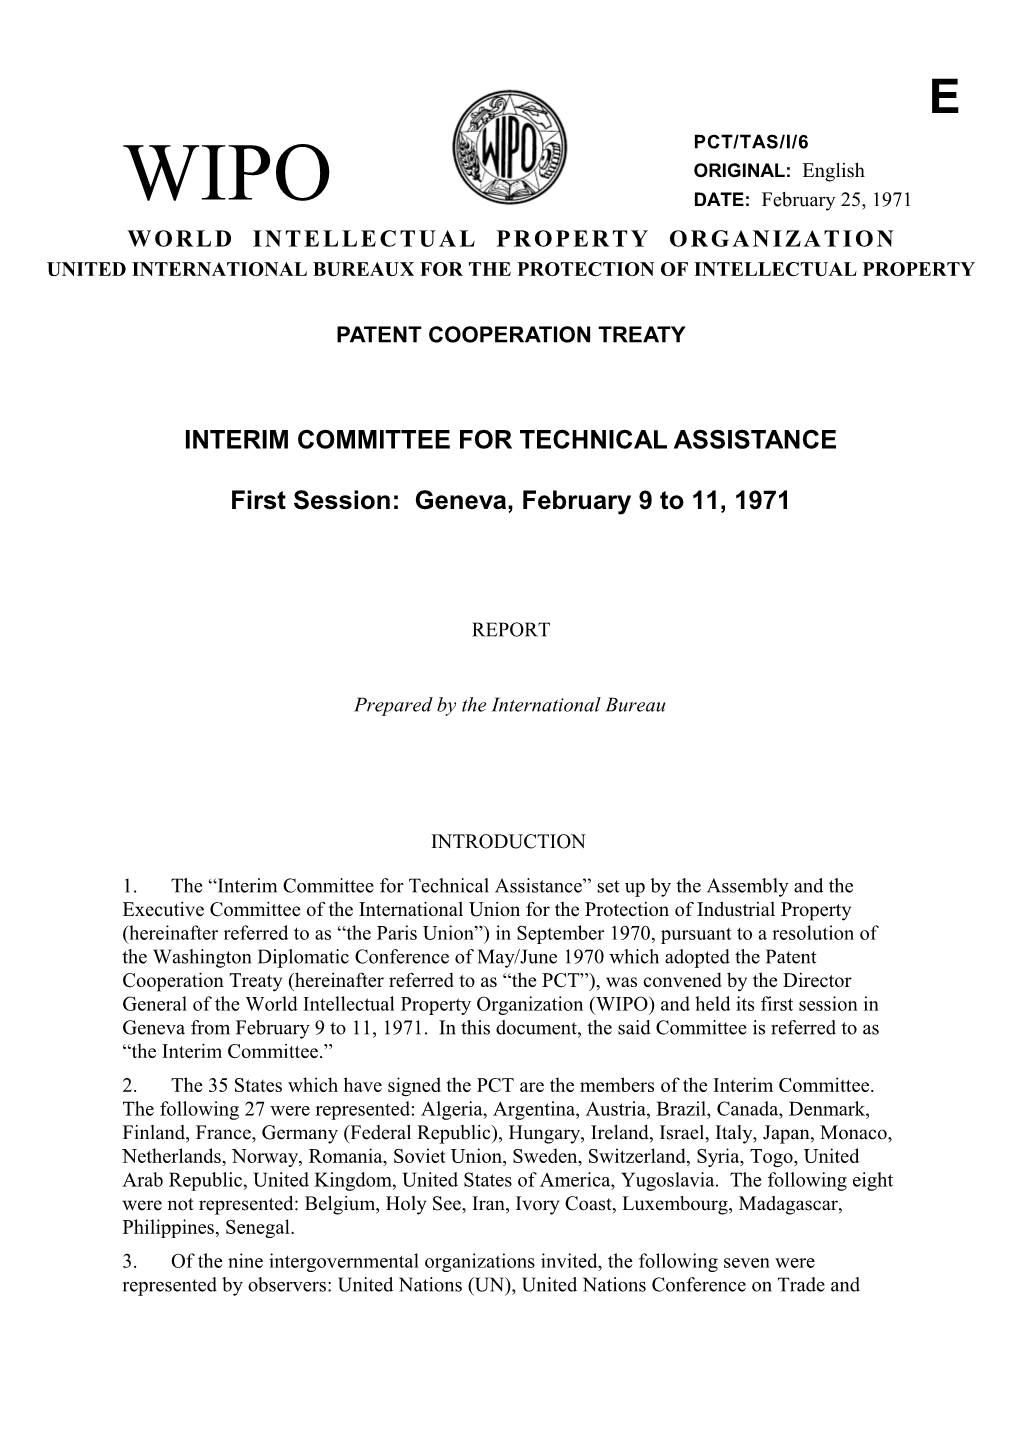 Interim Committee for Technical Assistance